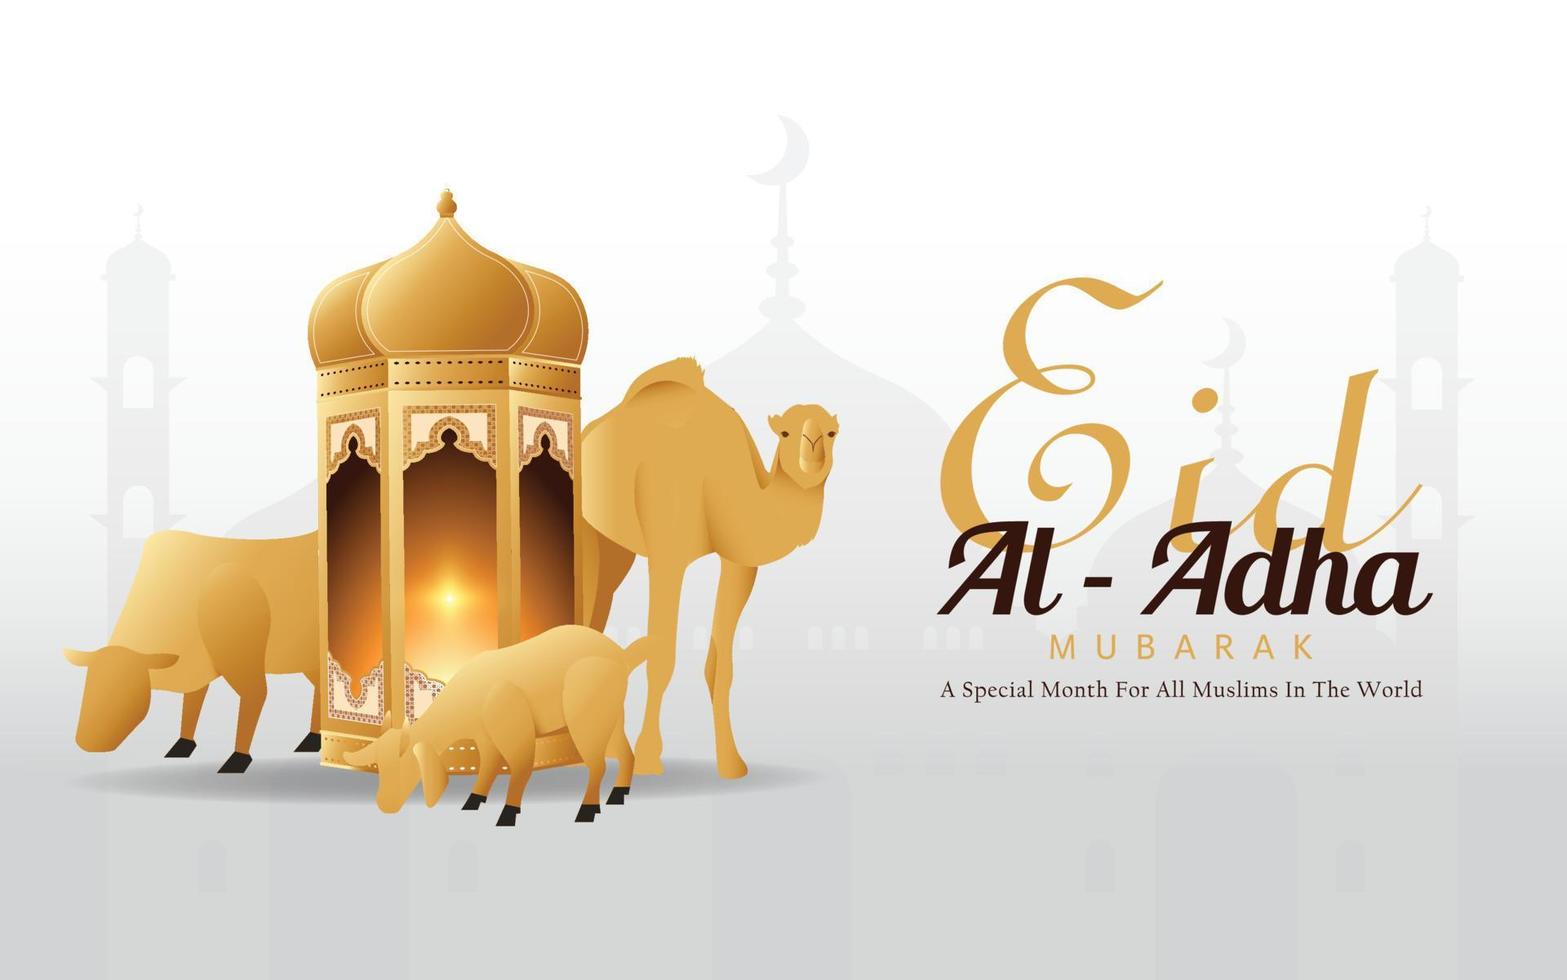 Eid Al-Adha Template Design. Holy Day for Muslims and Islam. Vector Illustration of Cow, Goat, and Camel in The Podium. Suitable For Posters, Banners, Web Campaigns, and Greeting Cards.